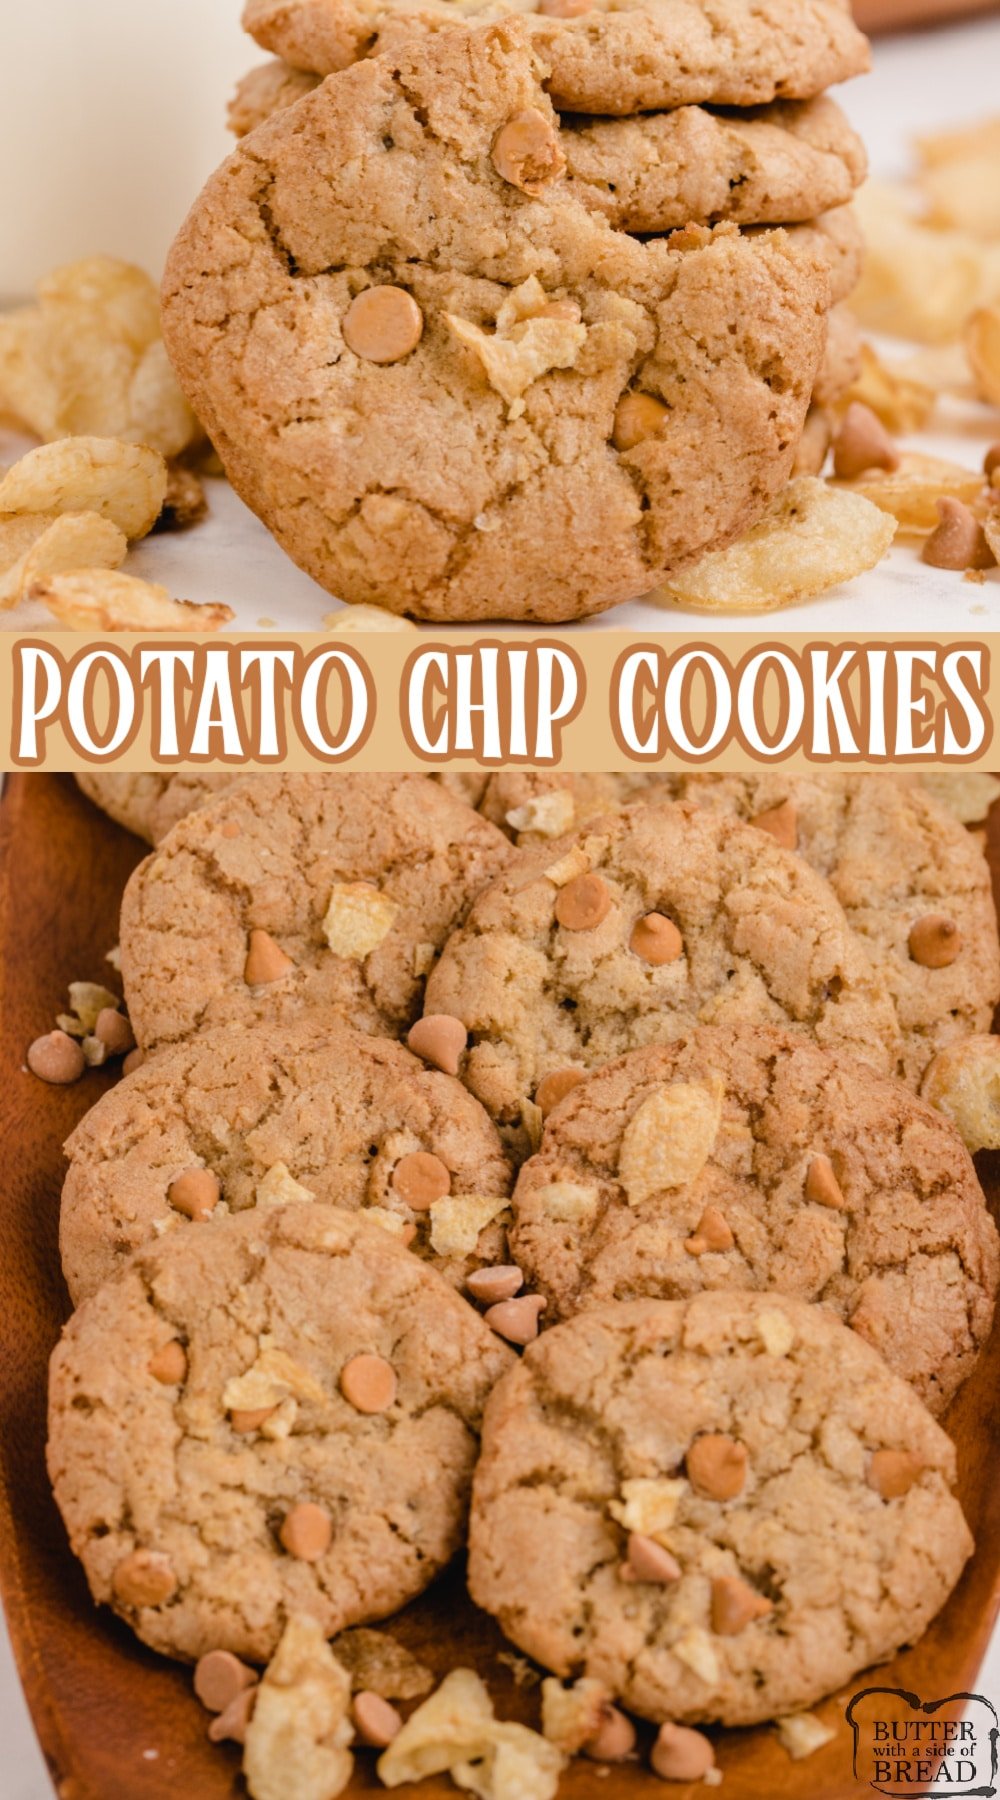 Potato Chip Cookies are the perfect combination of salty and sweet! Butterscotch chips and potato chips pair together so well in this potato chip cookie recipe!